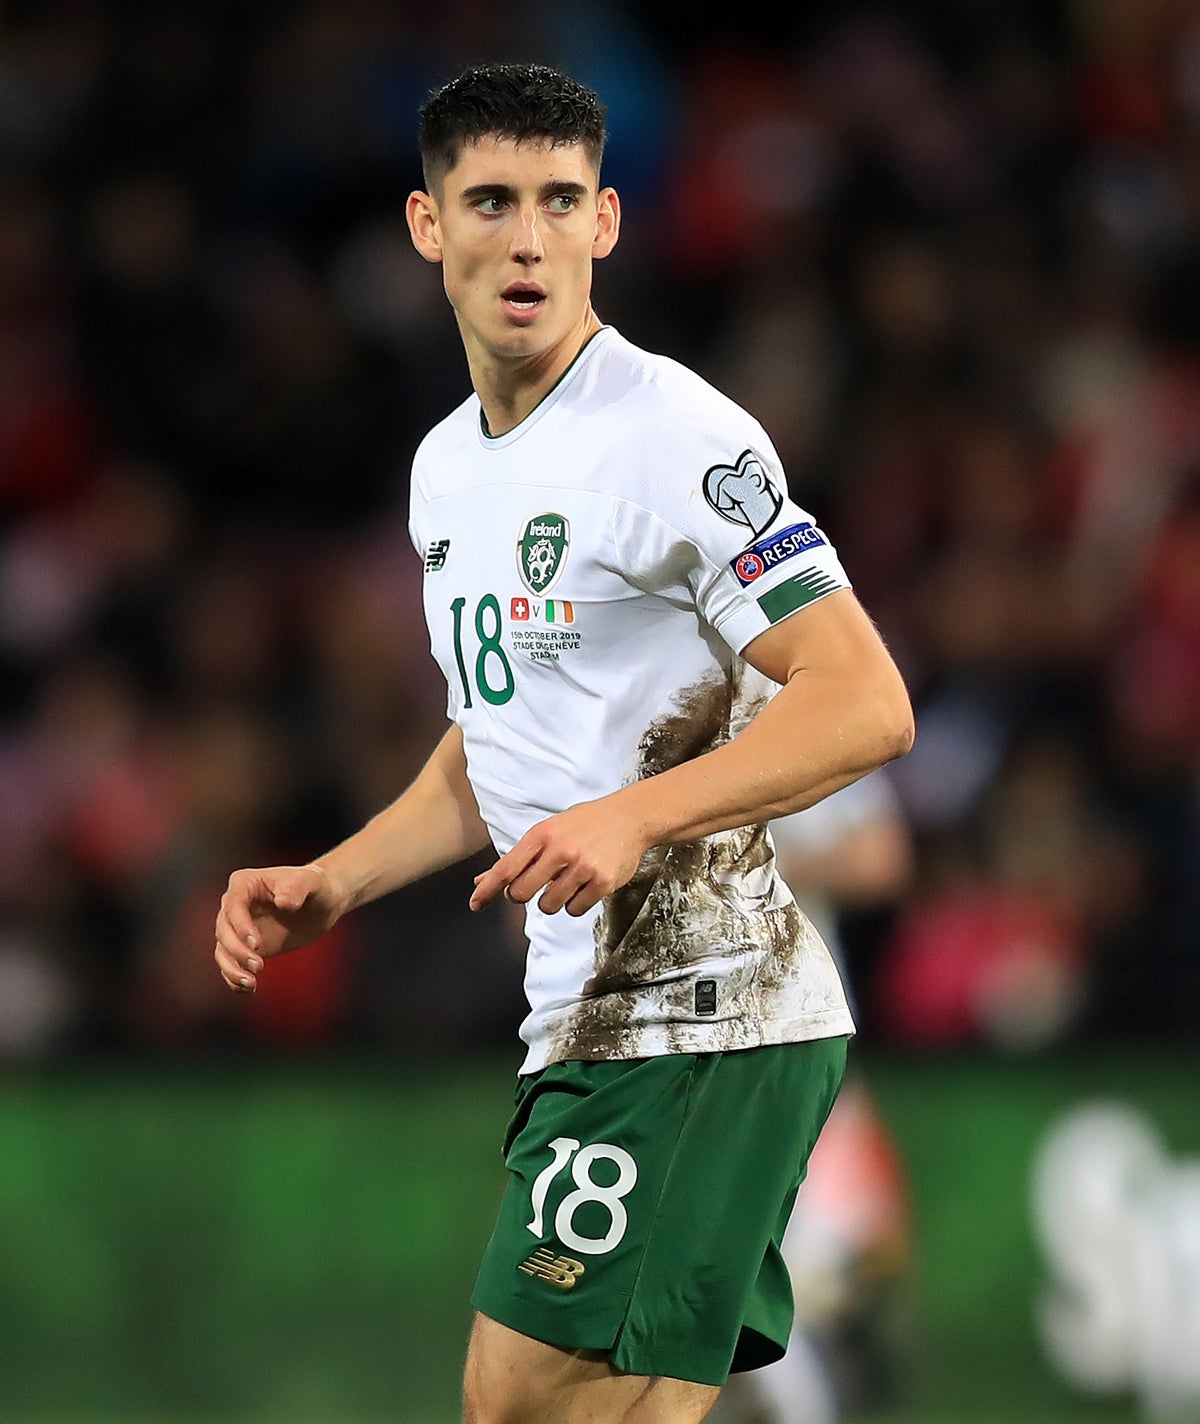 Callum O’Dowda has ‘unfinished business’ ahead of Ireland’s Nations League games